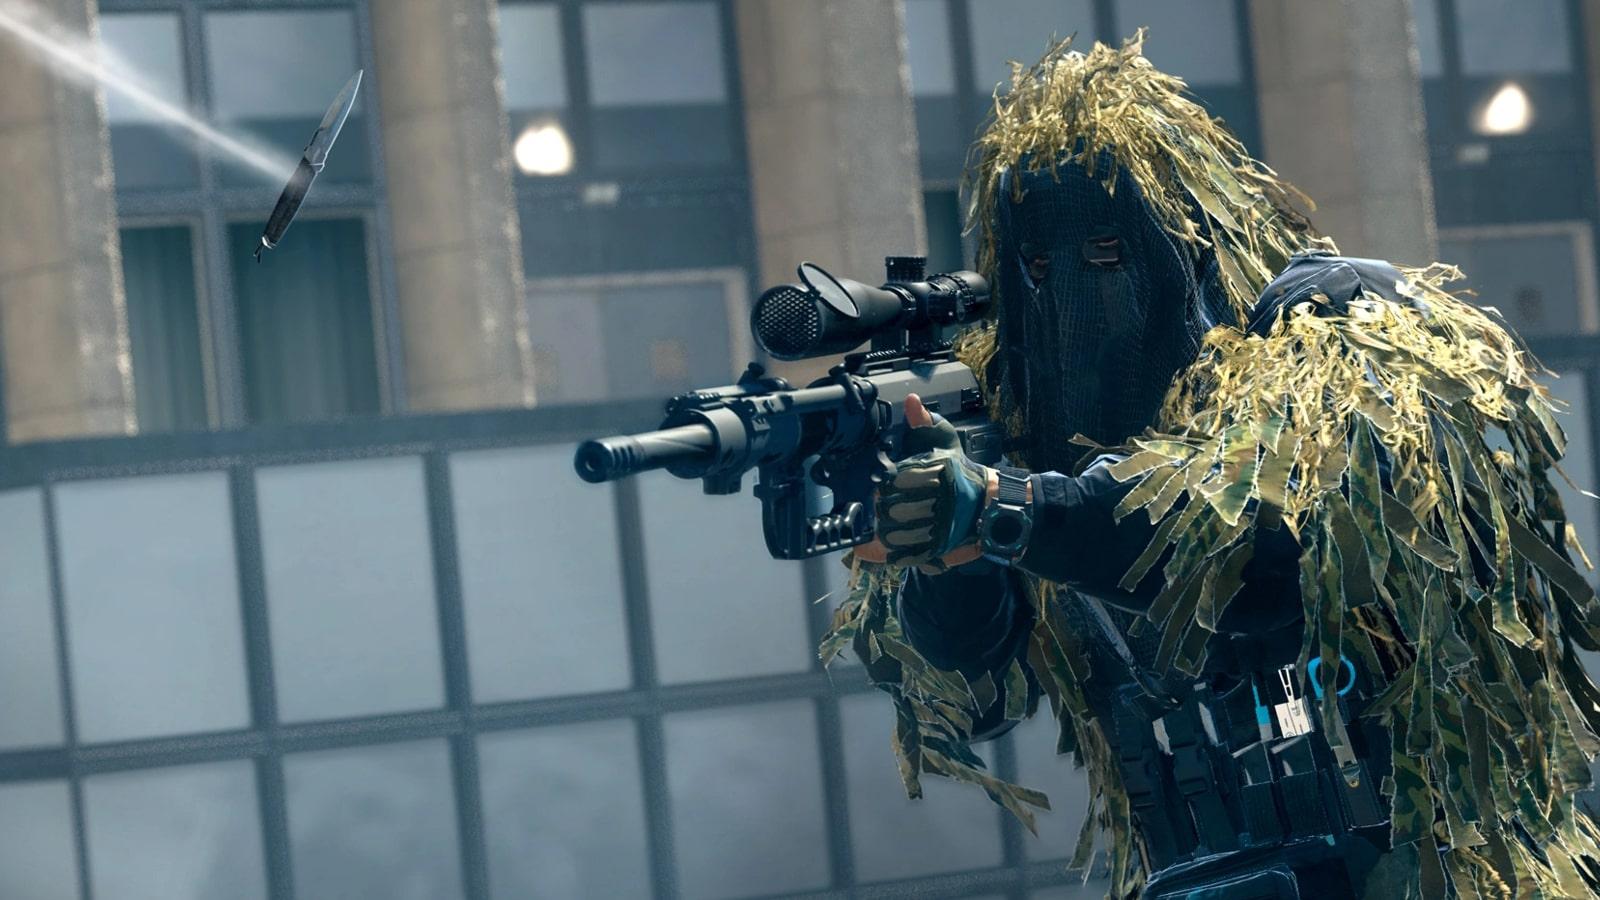 ghillie suit sniper aiming FJX Imperium with incoming throwing knife